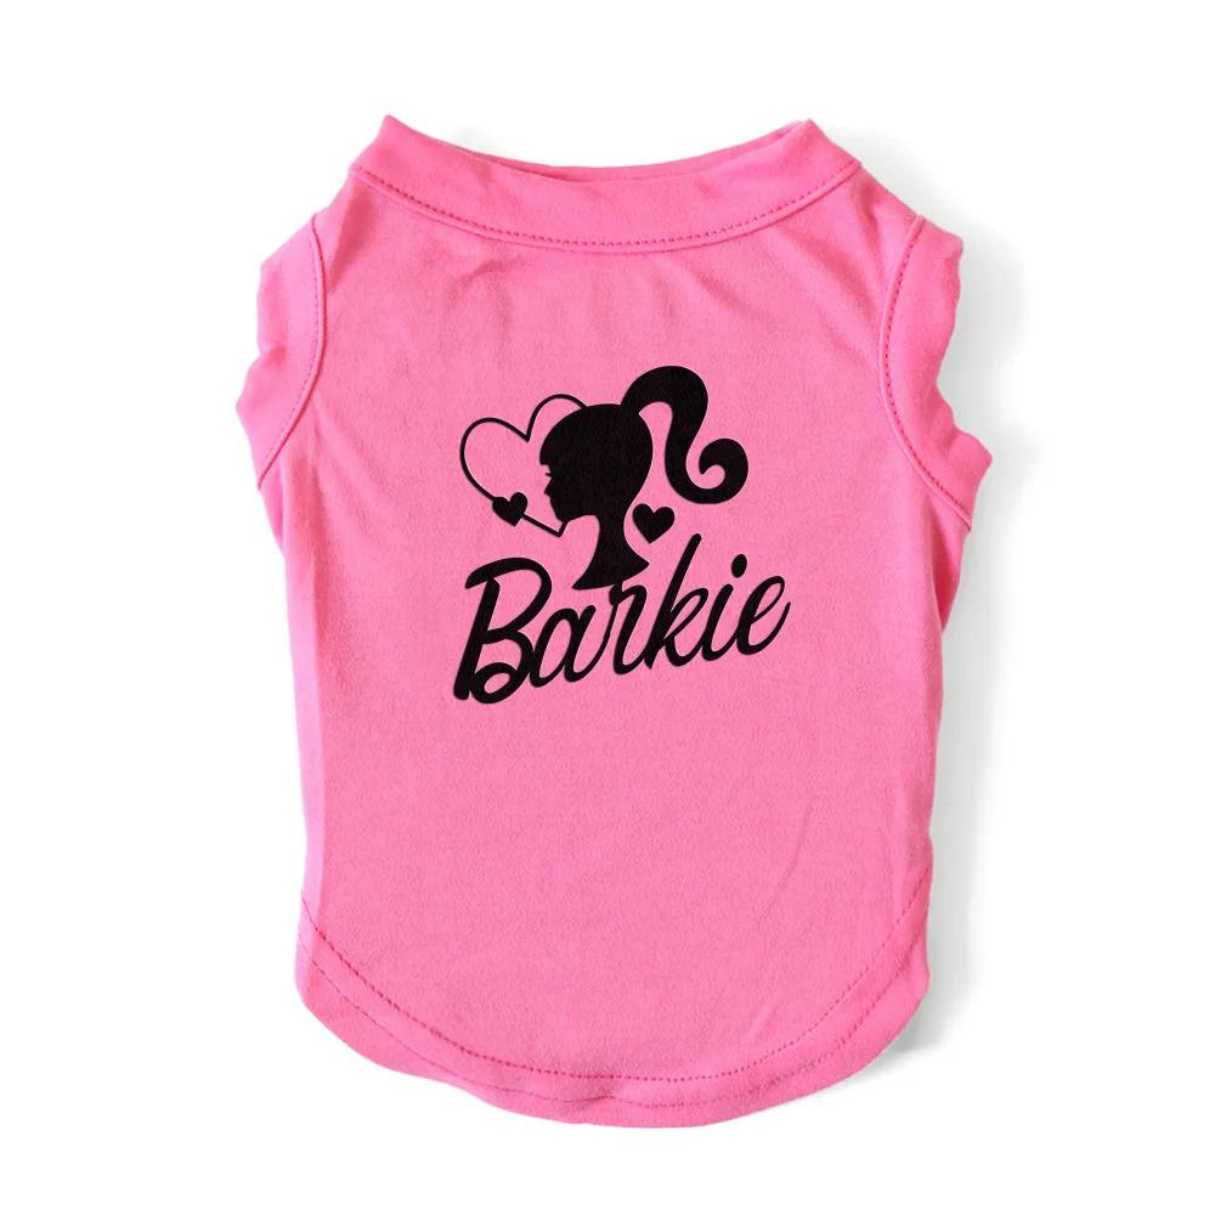 Barkie Doll Pink Tshirt, sleeveless, singlet, clothes with black writing and barbie on it.